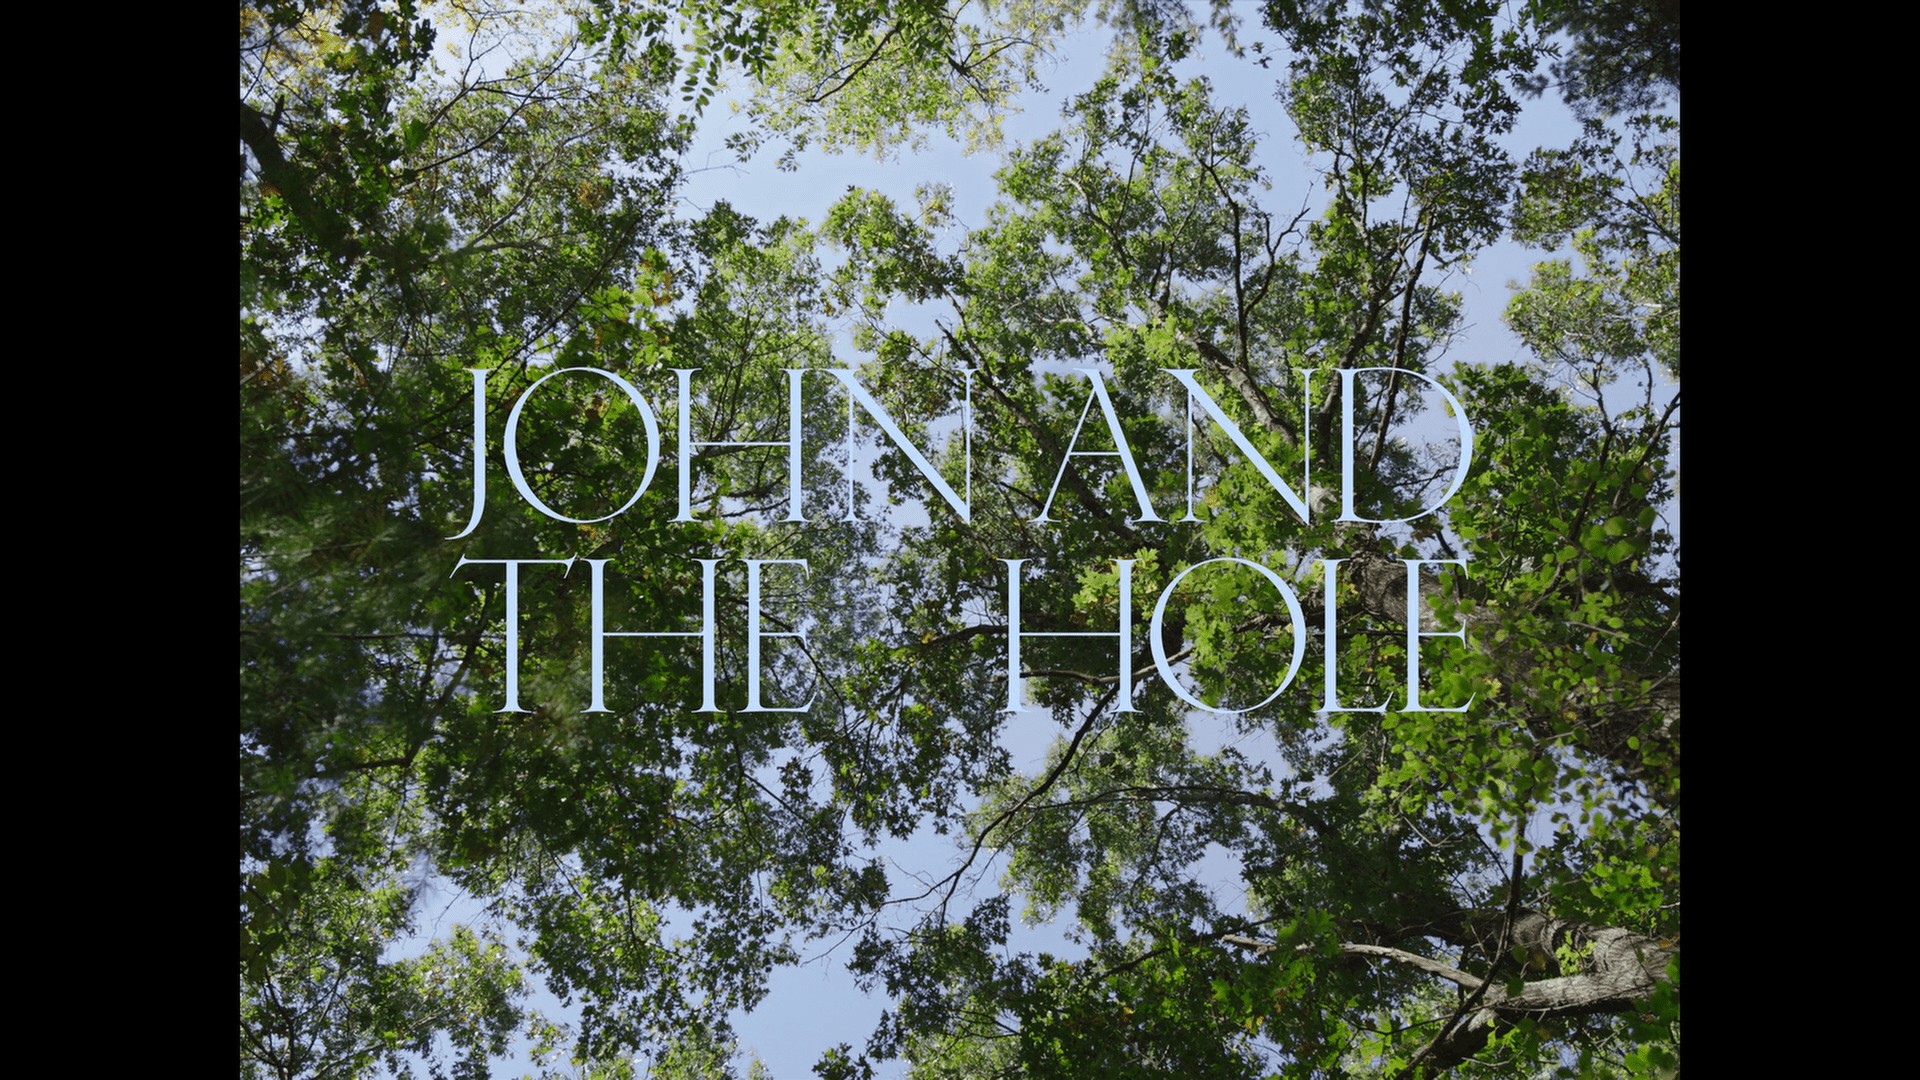 john and the hole real title